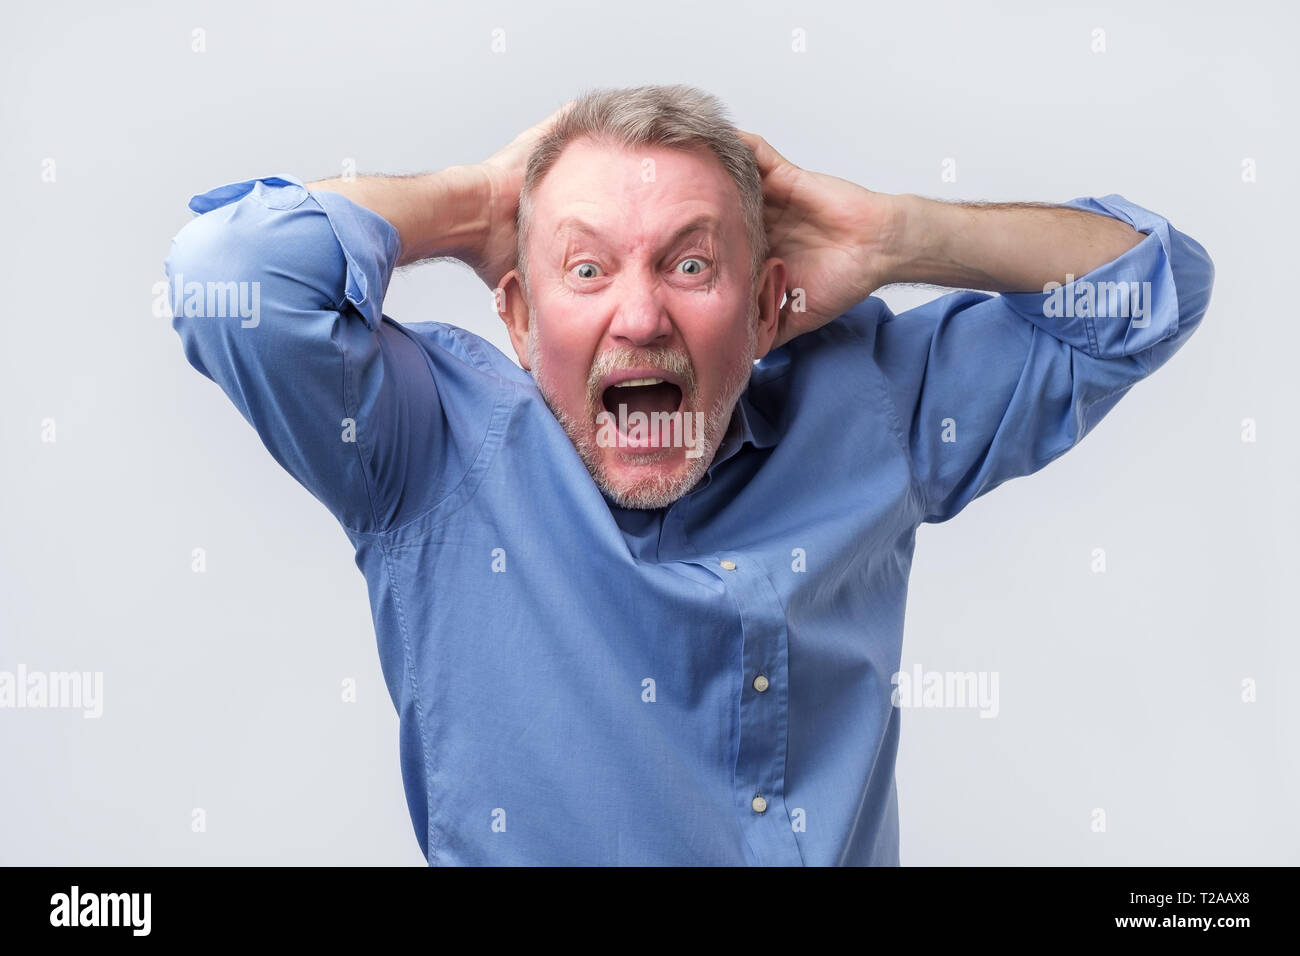 Senior man in blue shirt with angry grimace on his face,with mouth opened in shout, ready to argue. Studio shoot. Negative human emotion. Stock Photo